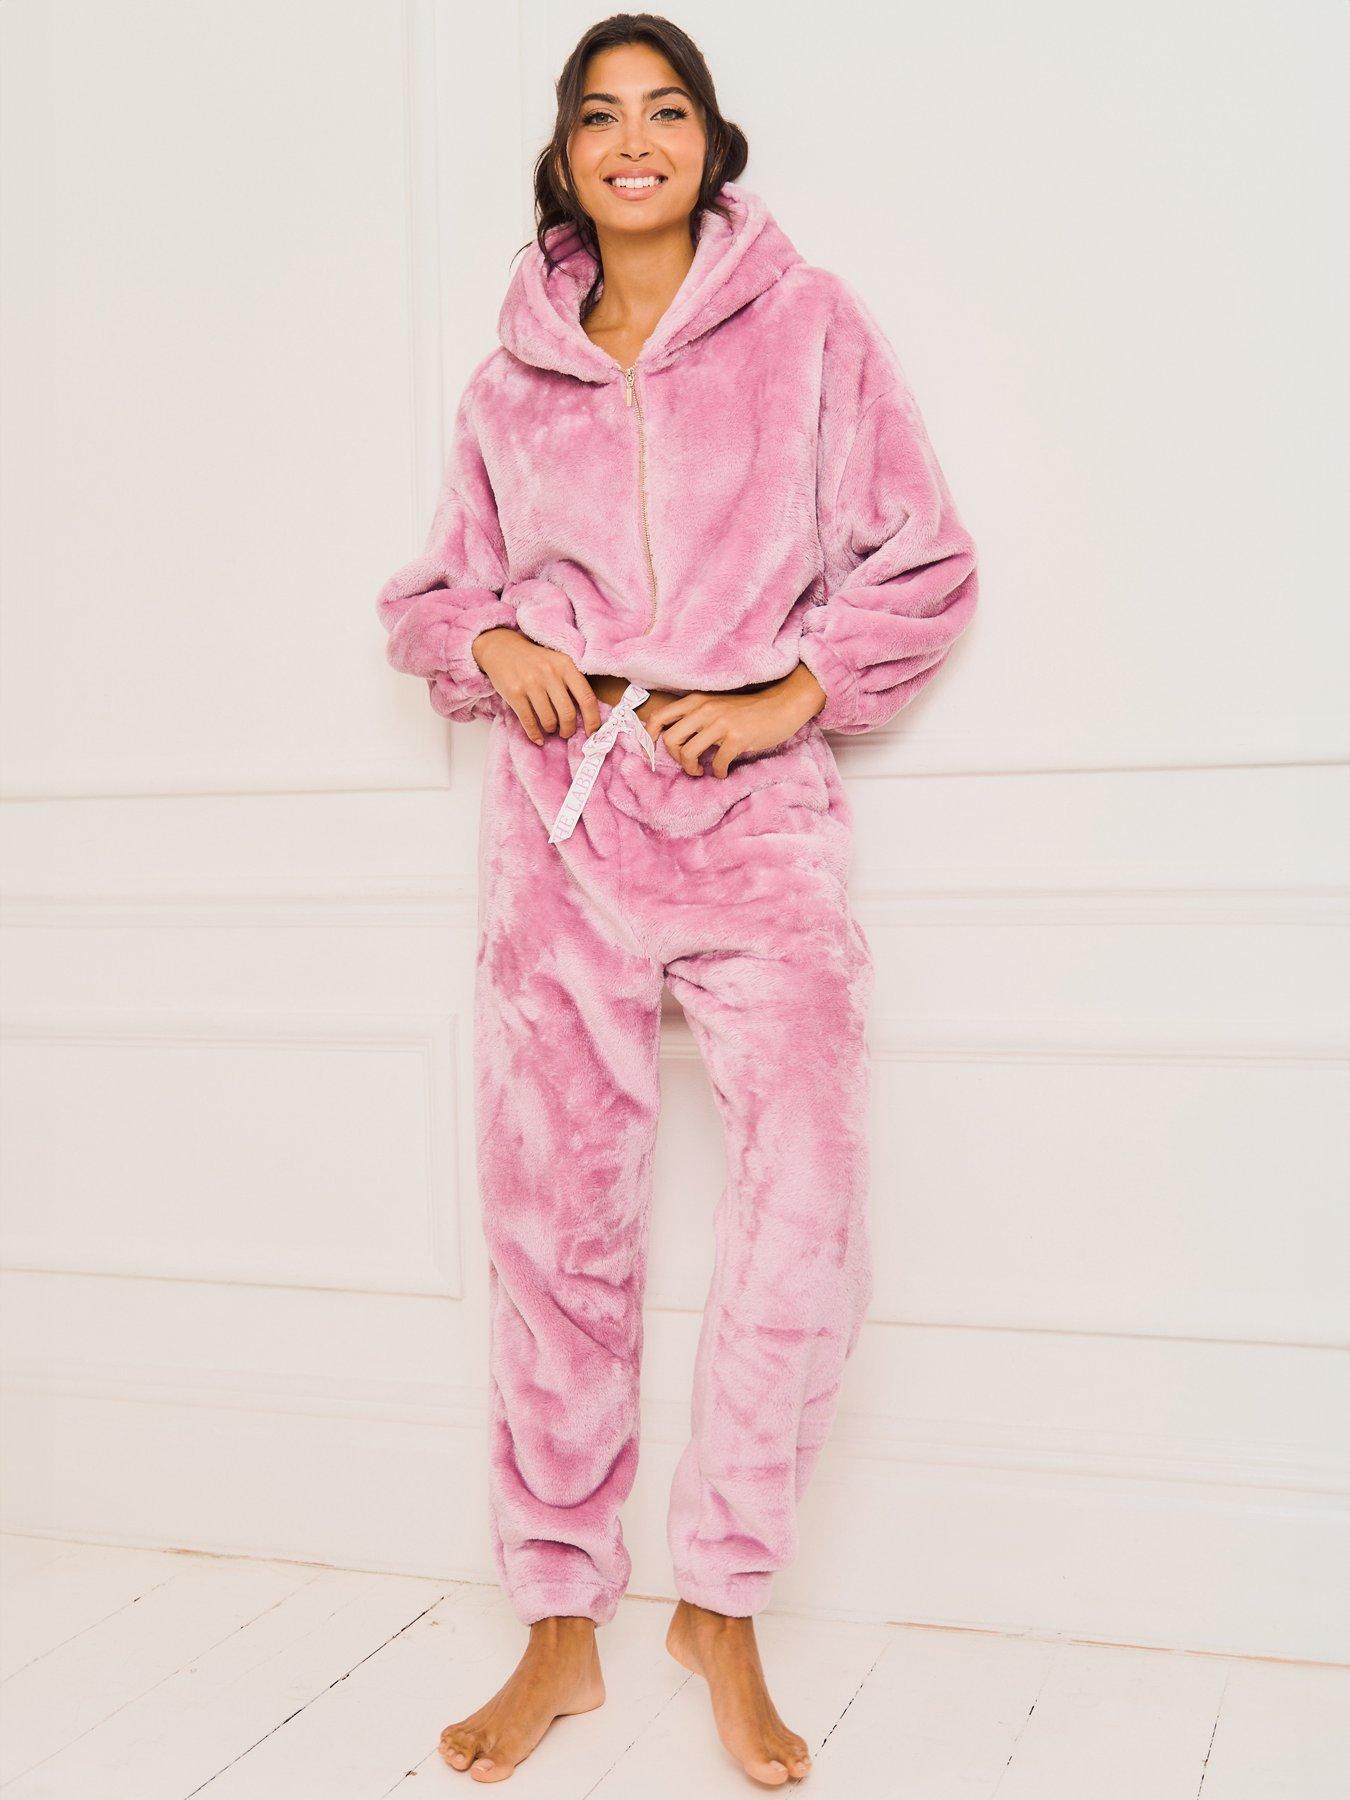 Lands' End Girl's Fleece Footed Pajamas Jammies One Piece - Size S(4)